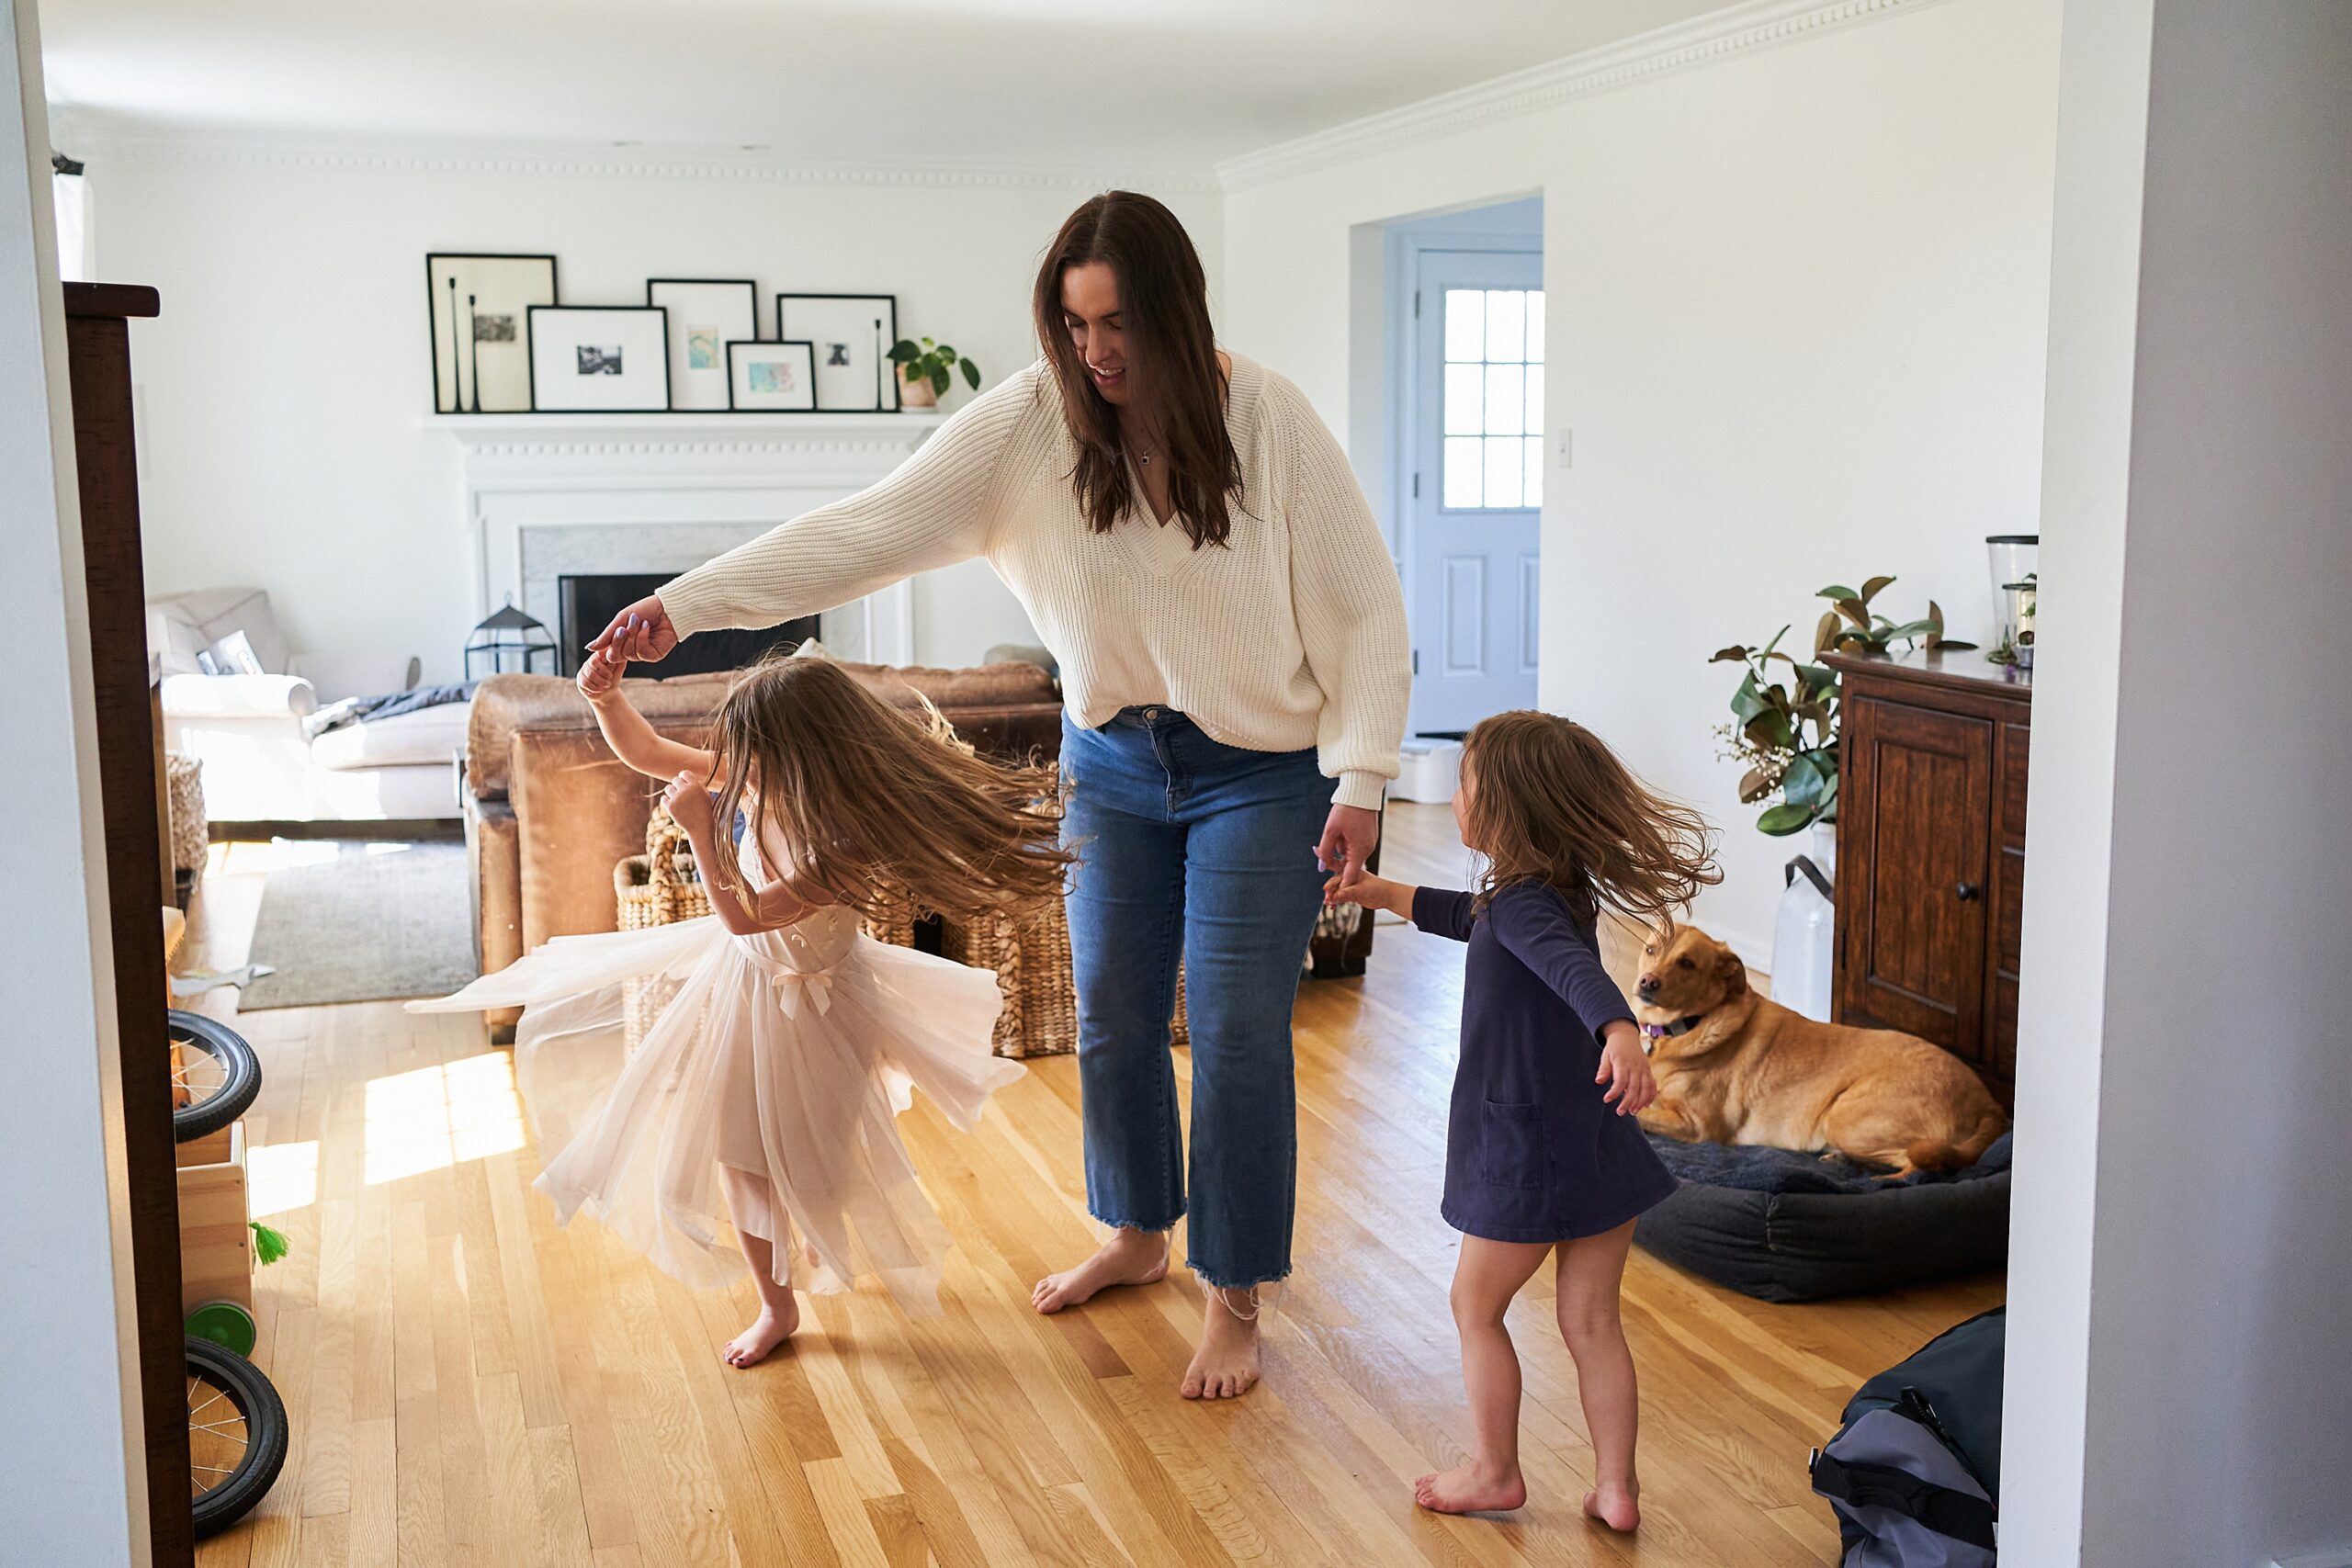 A woman plays with two young girls in a home living room while a dog watches.